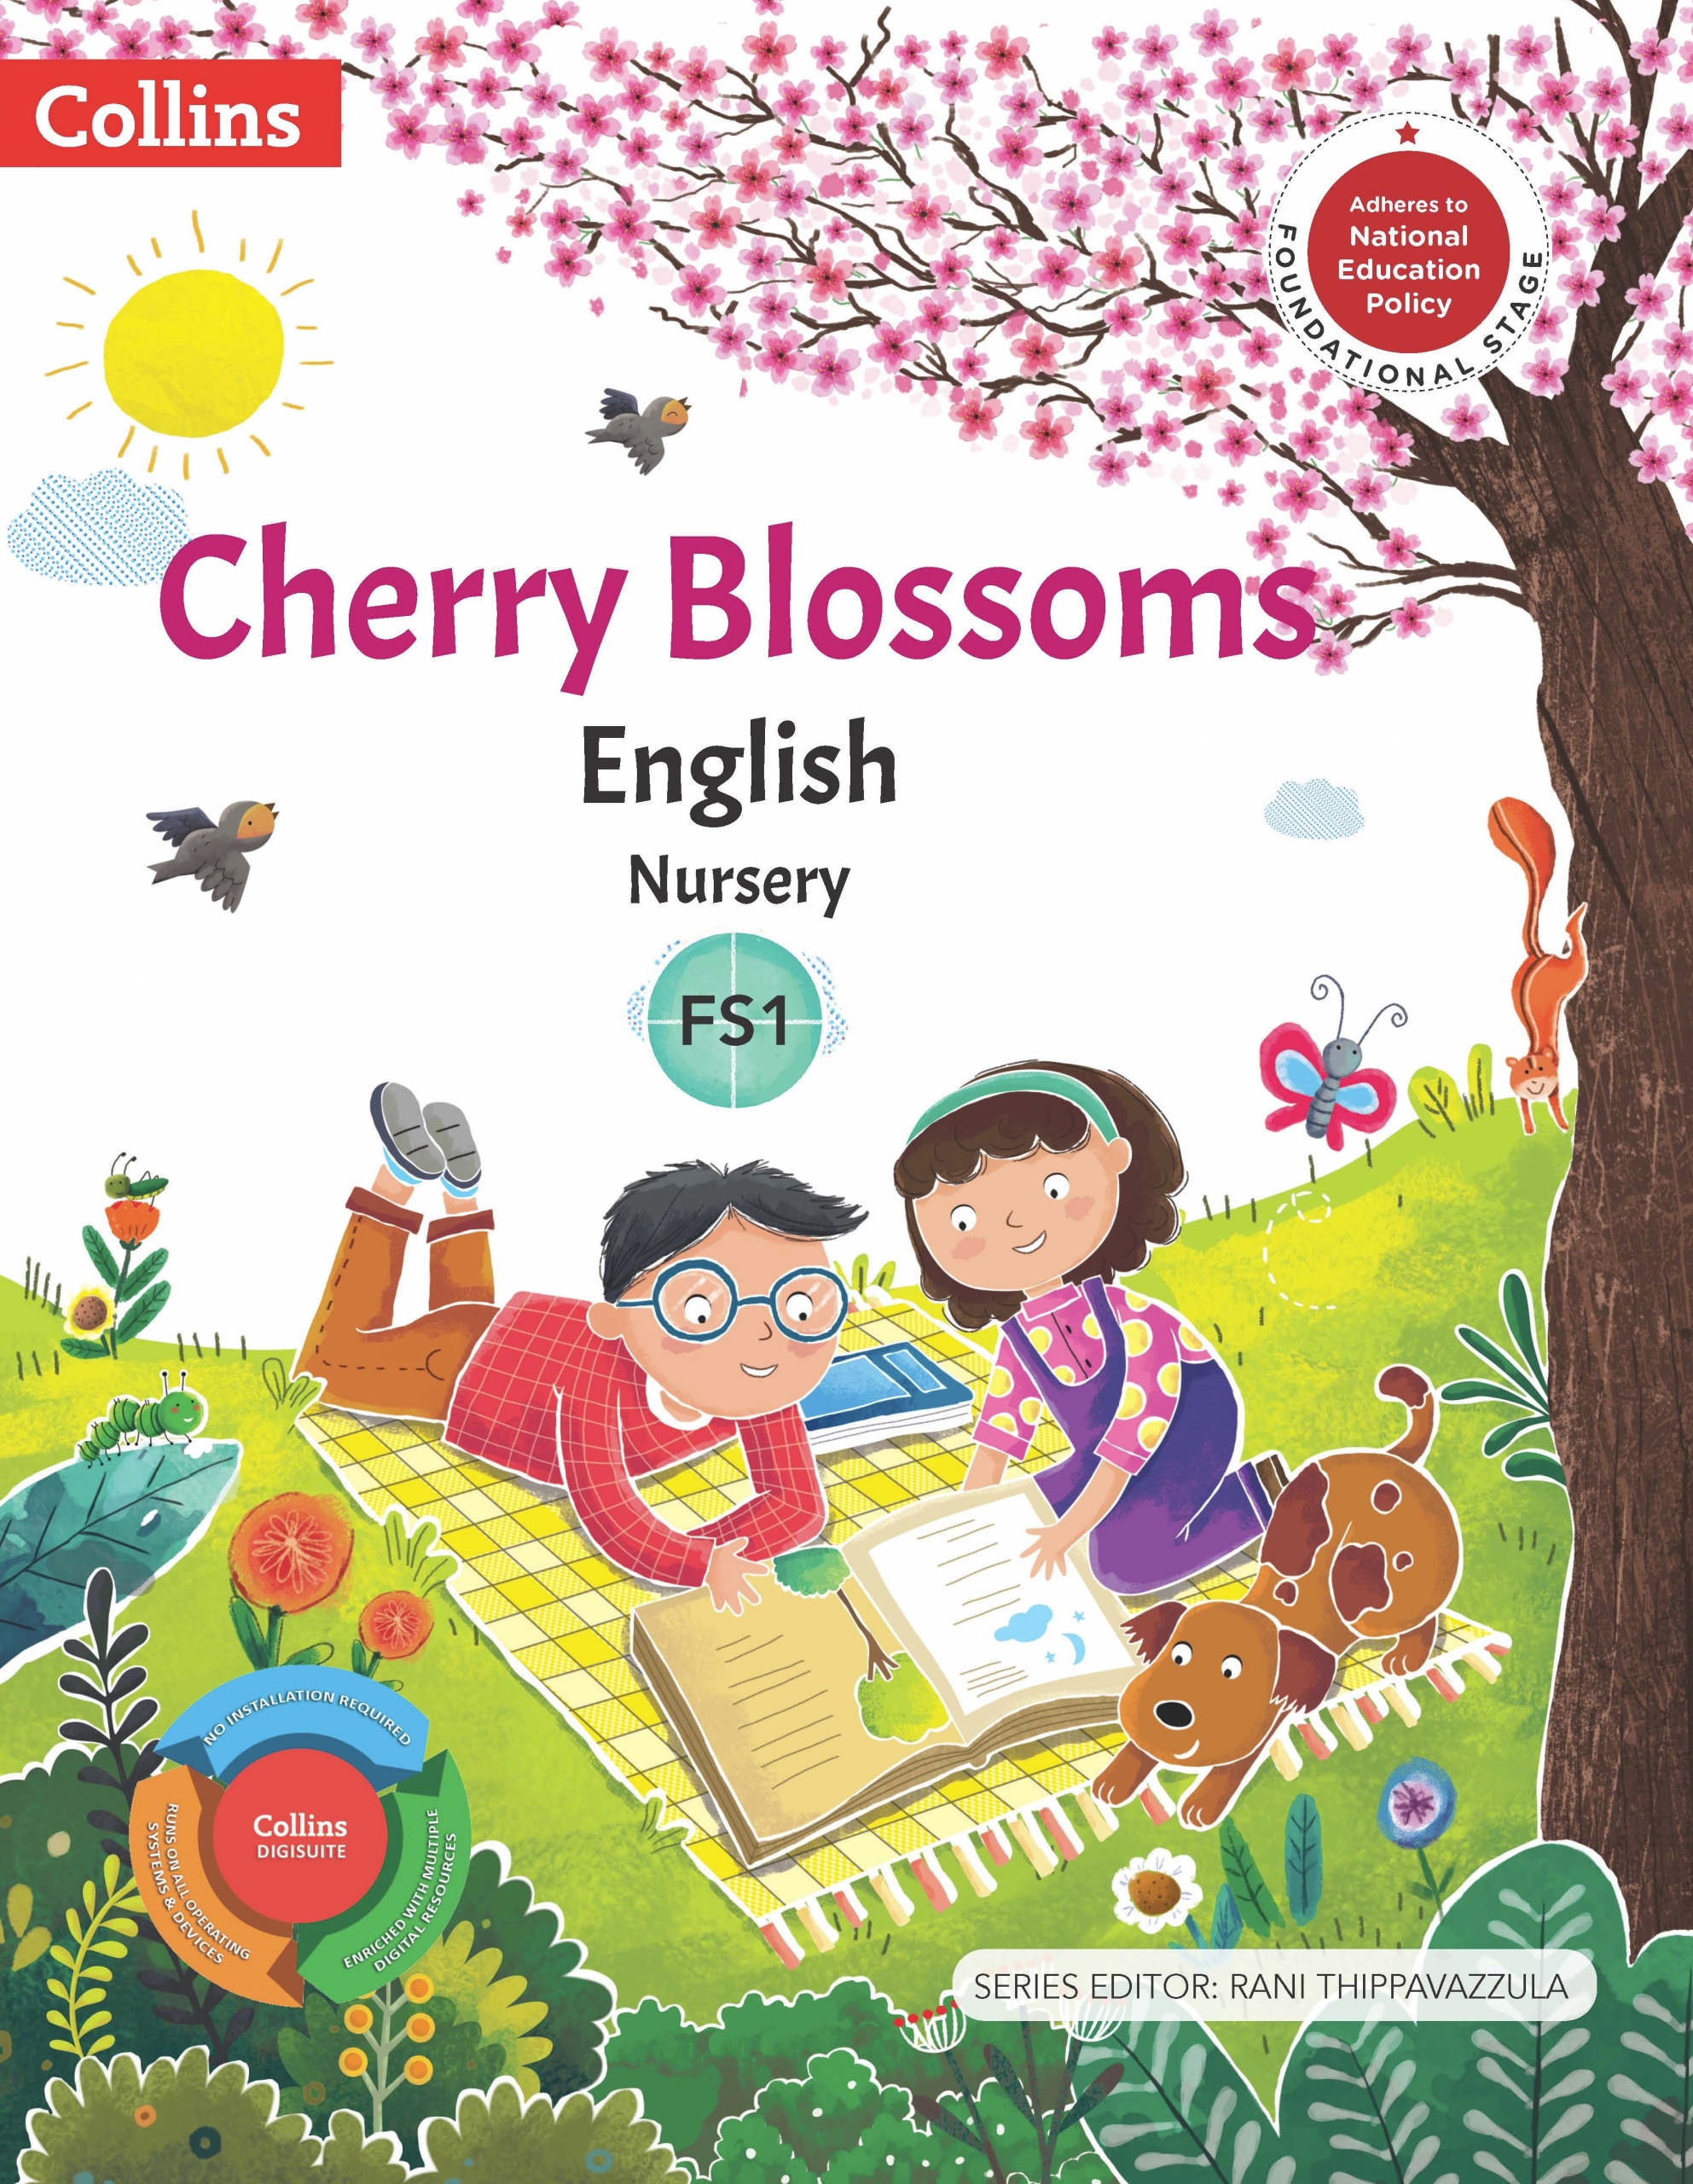 Cherry Blossoms Nursery English scaled